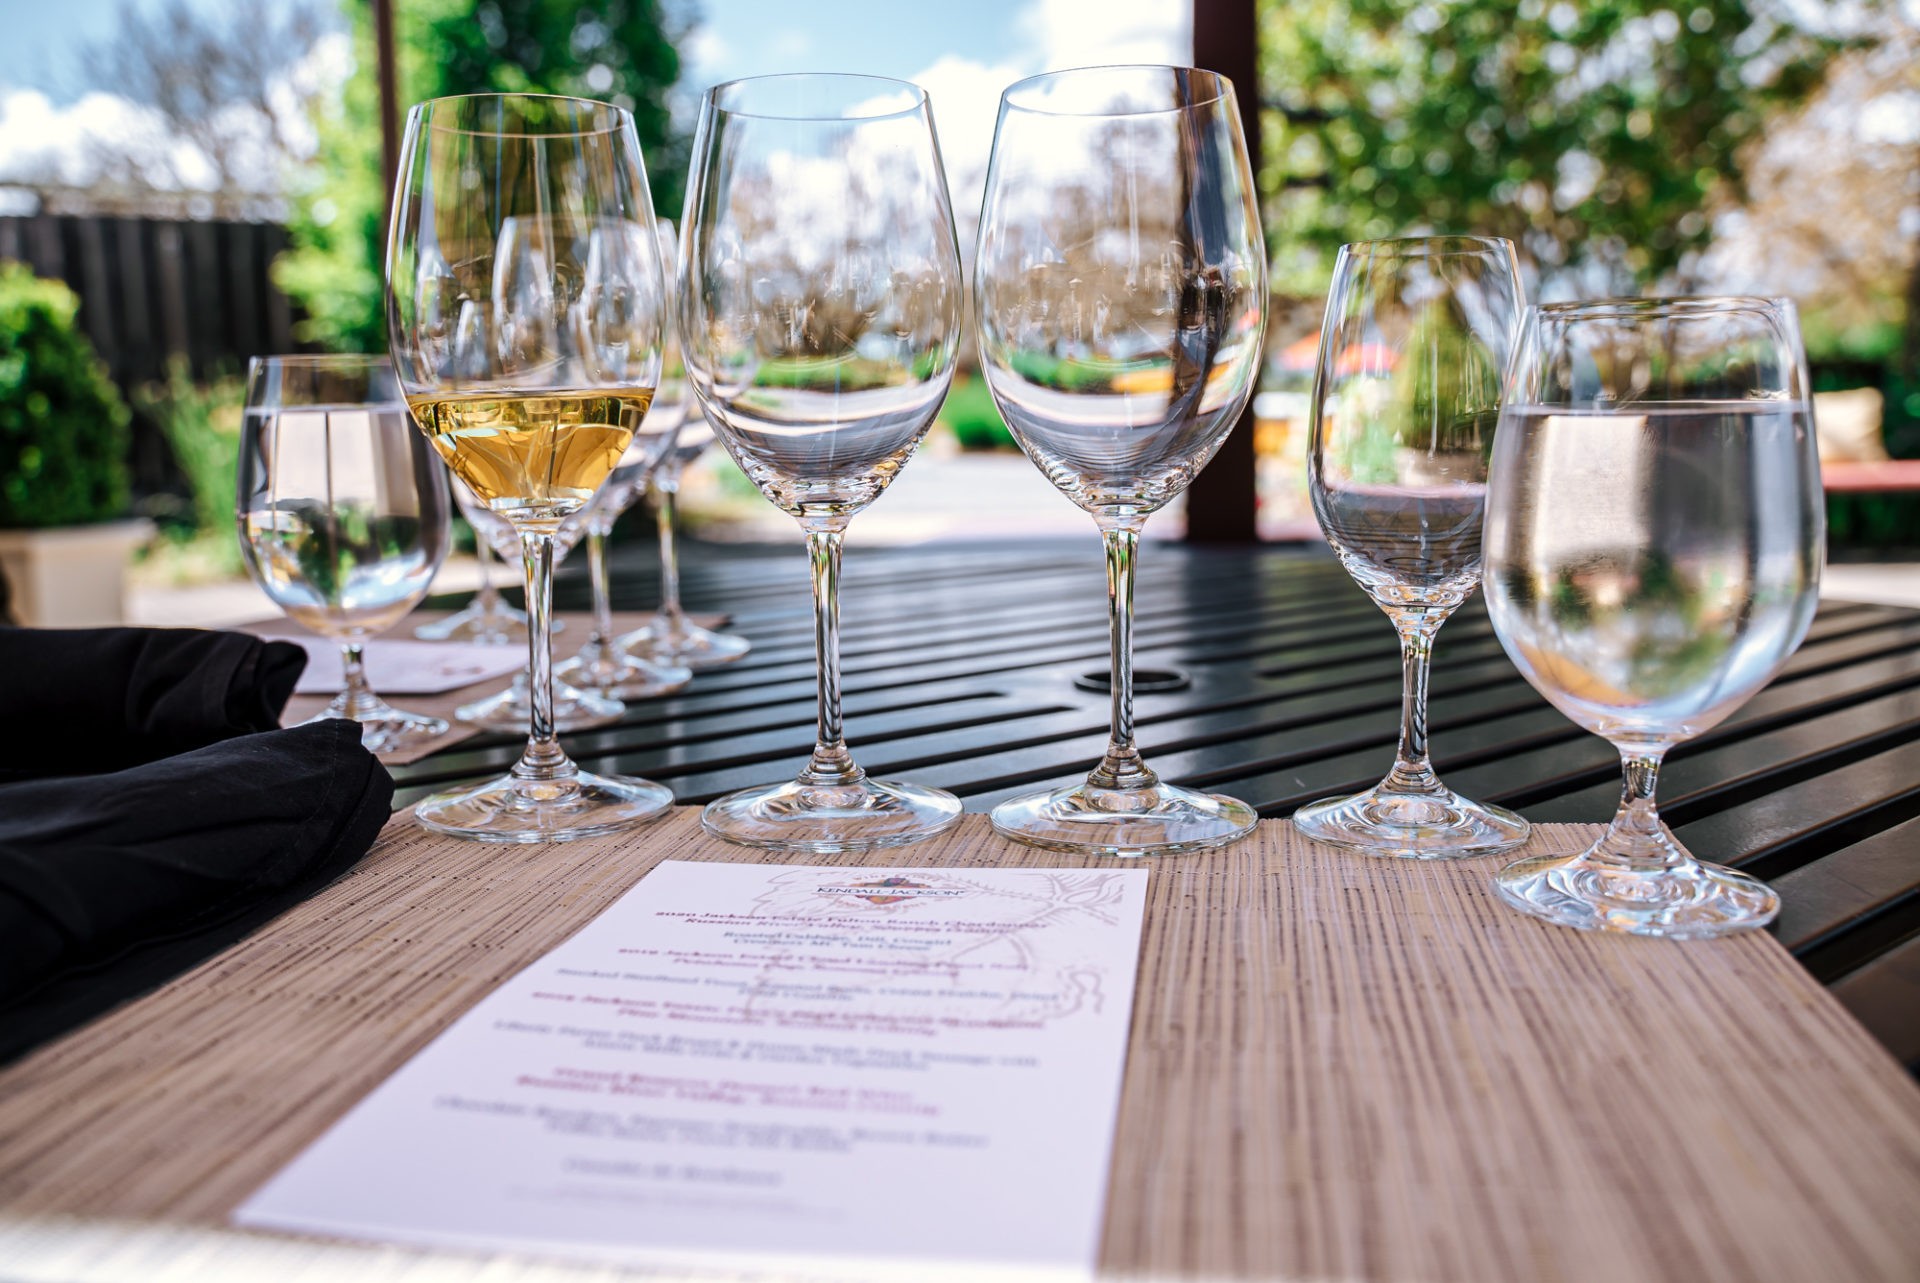 Wine tasting at Kendall Jackson Winery, things to do in sonoma county